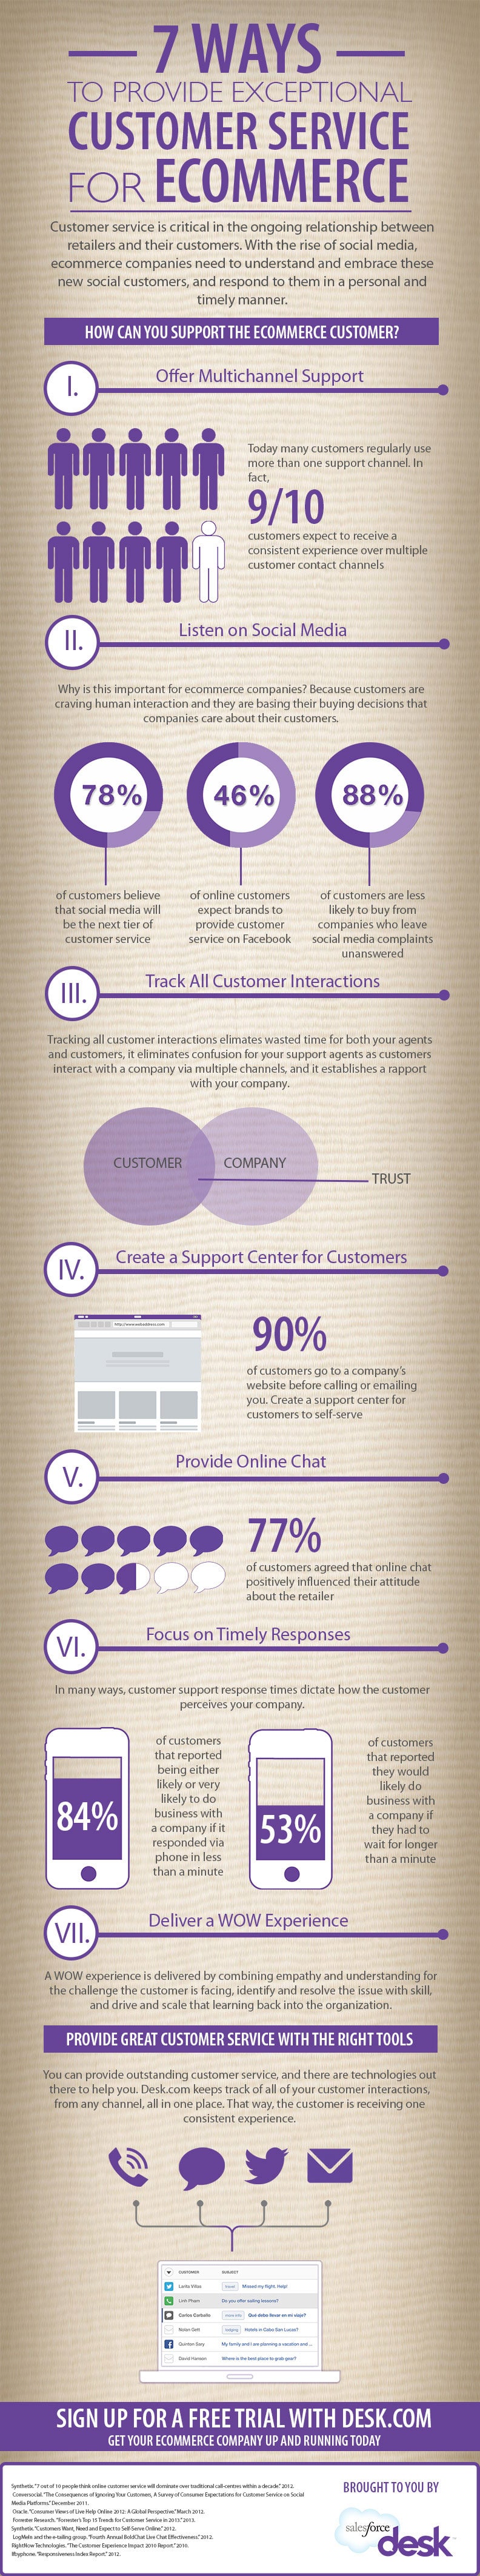 7 Ways To Provide Exceptional Online Customer Service [Infographic]